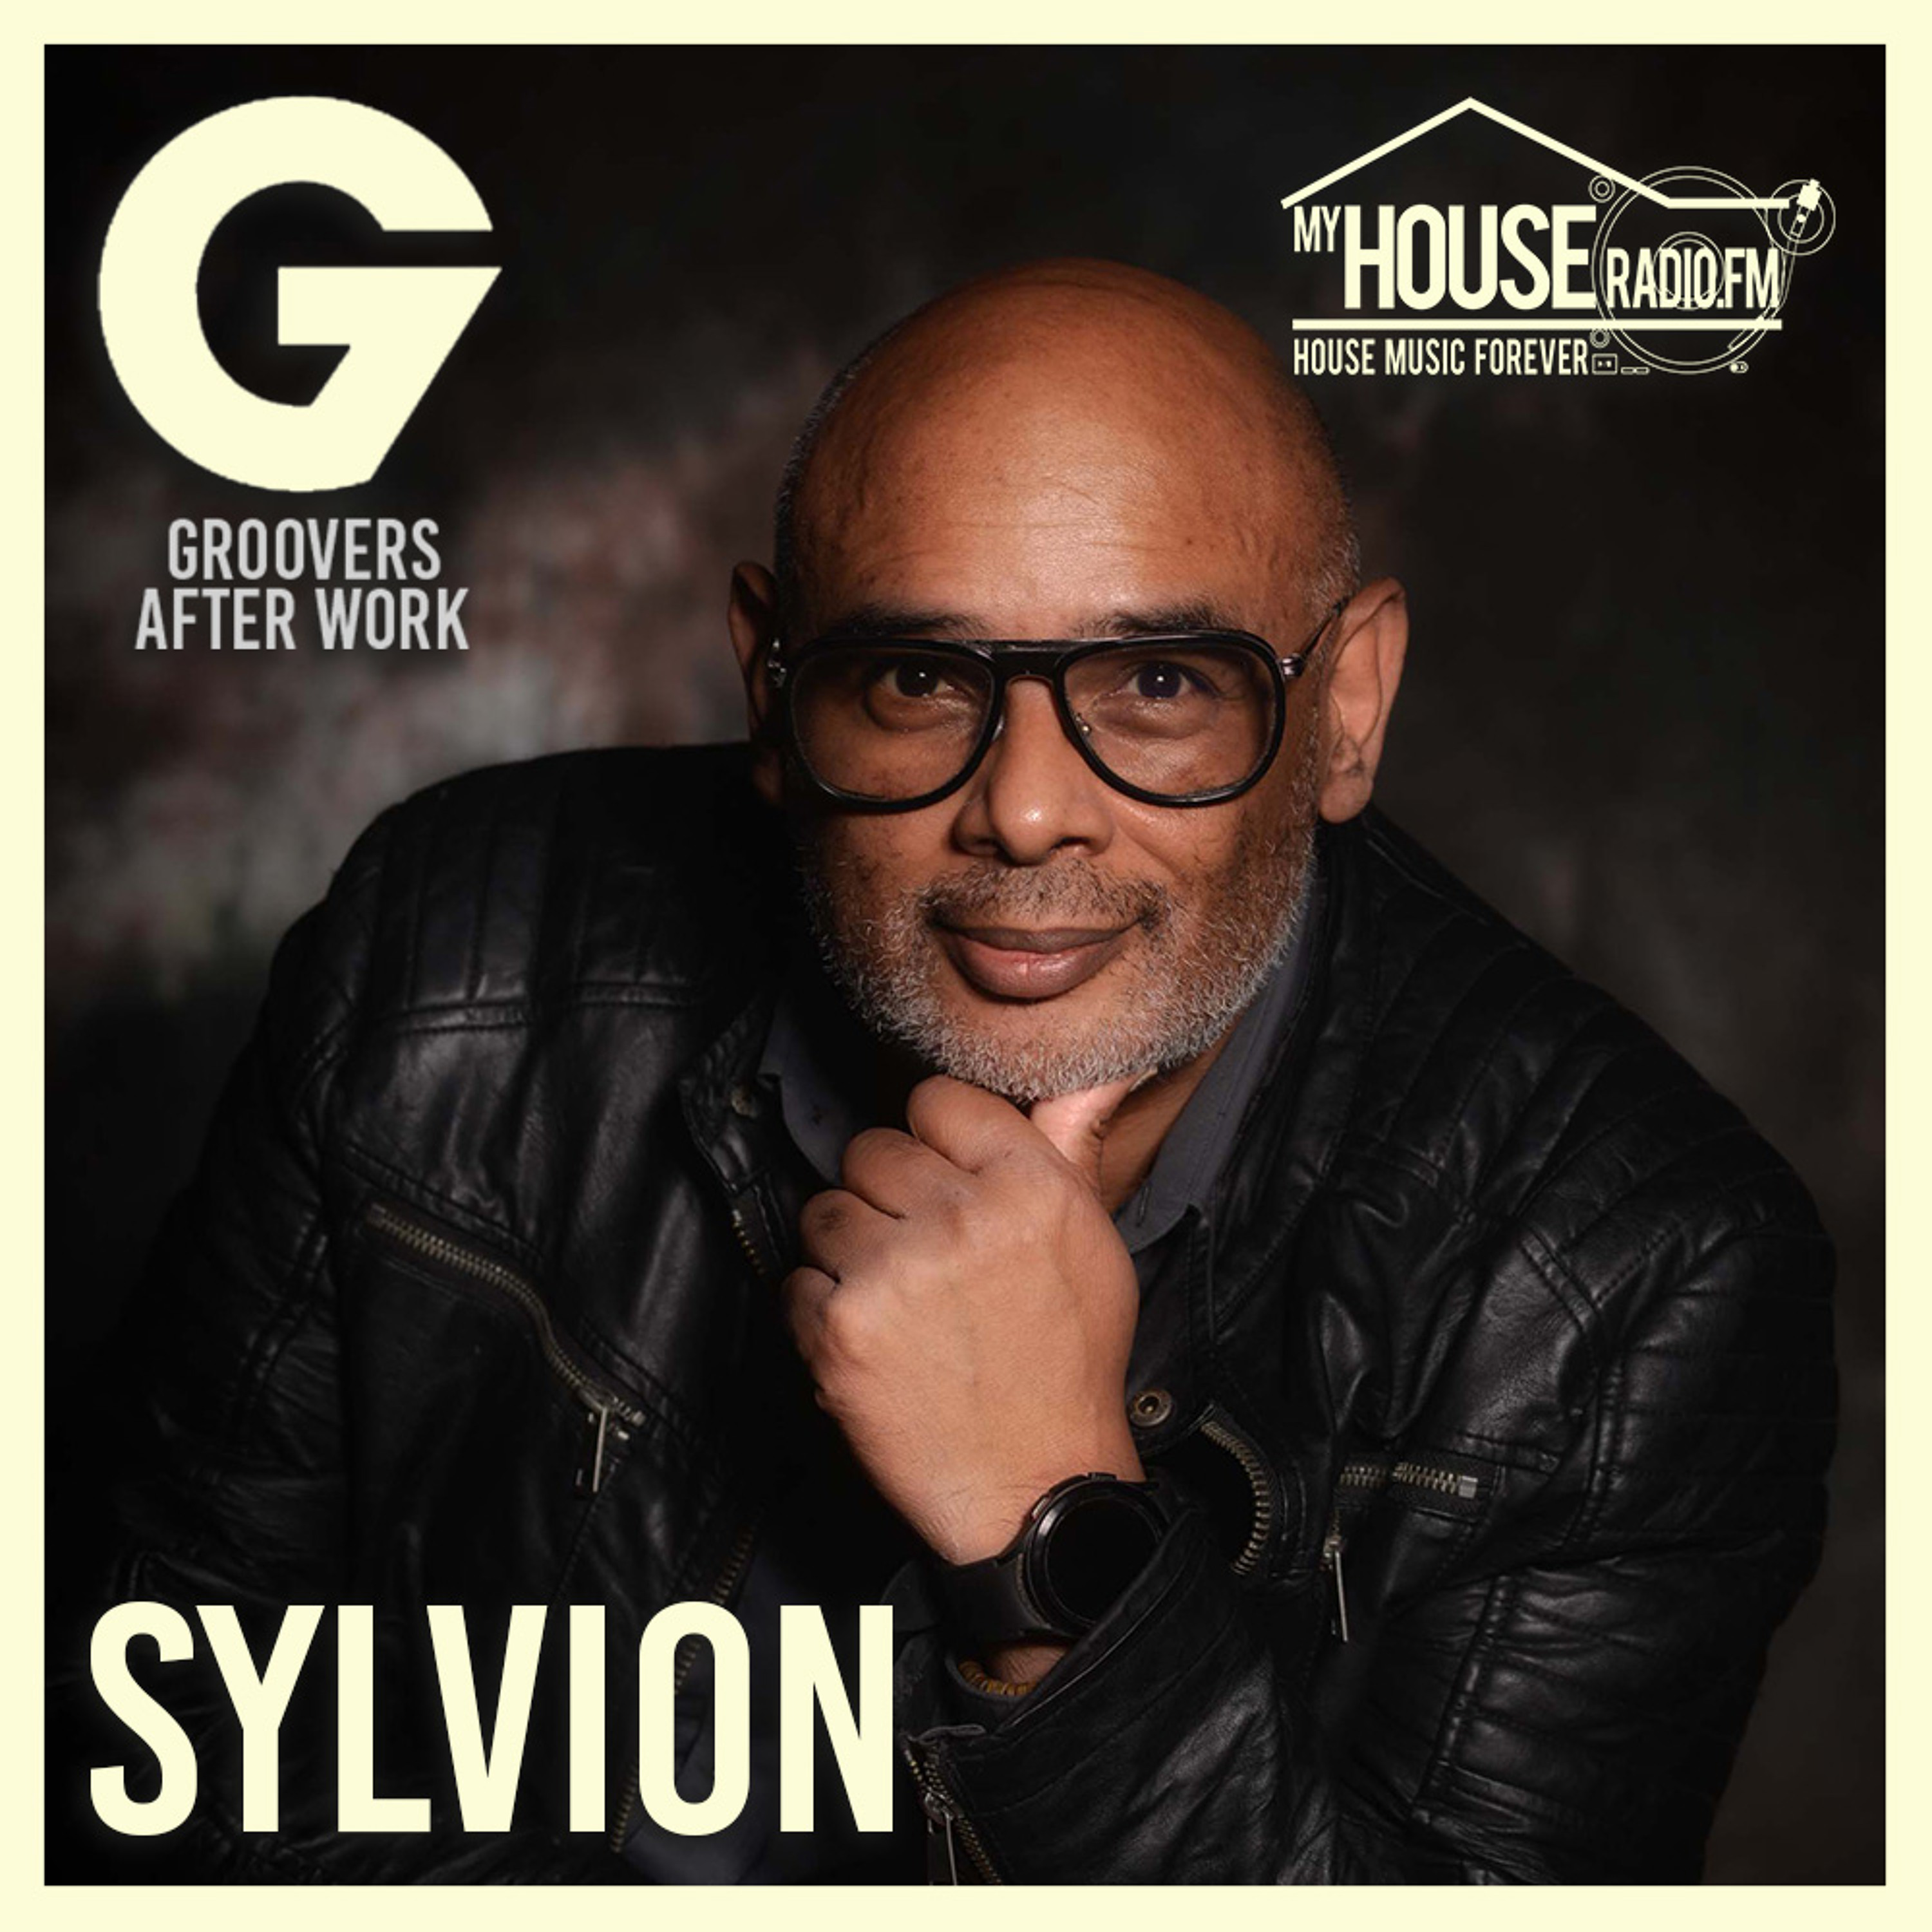 23#17-2 After Work On My House Radio By SylvioN